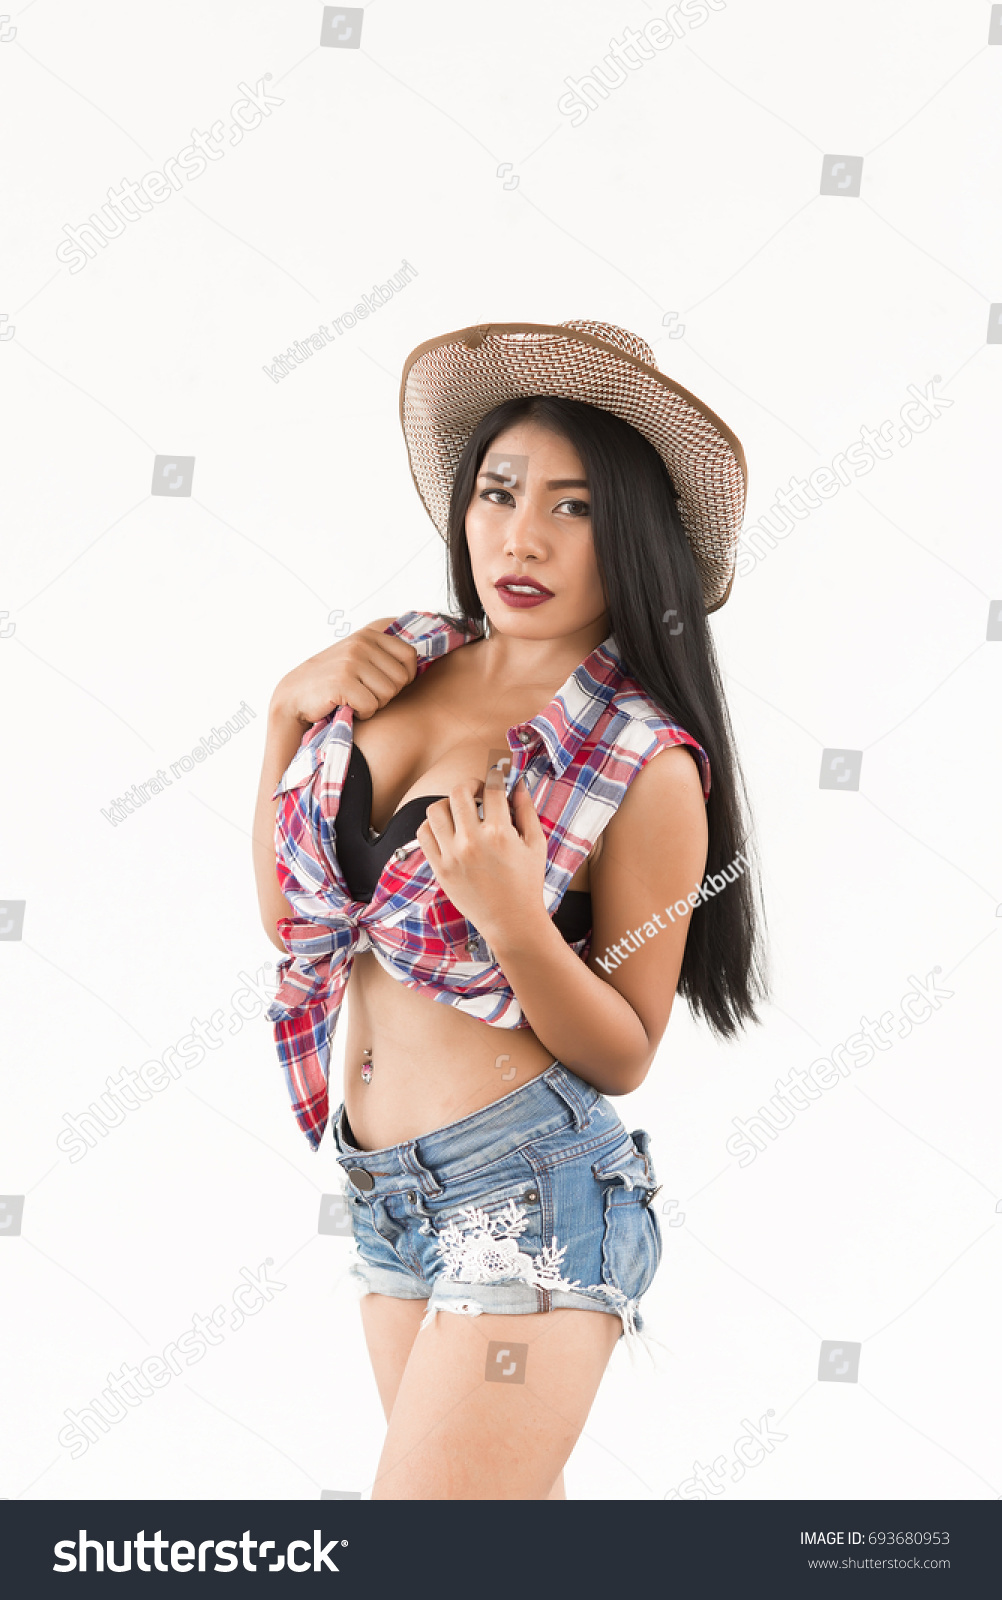 Asian cowgirl style